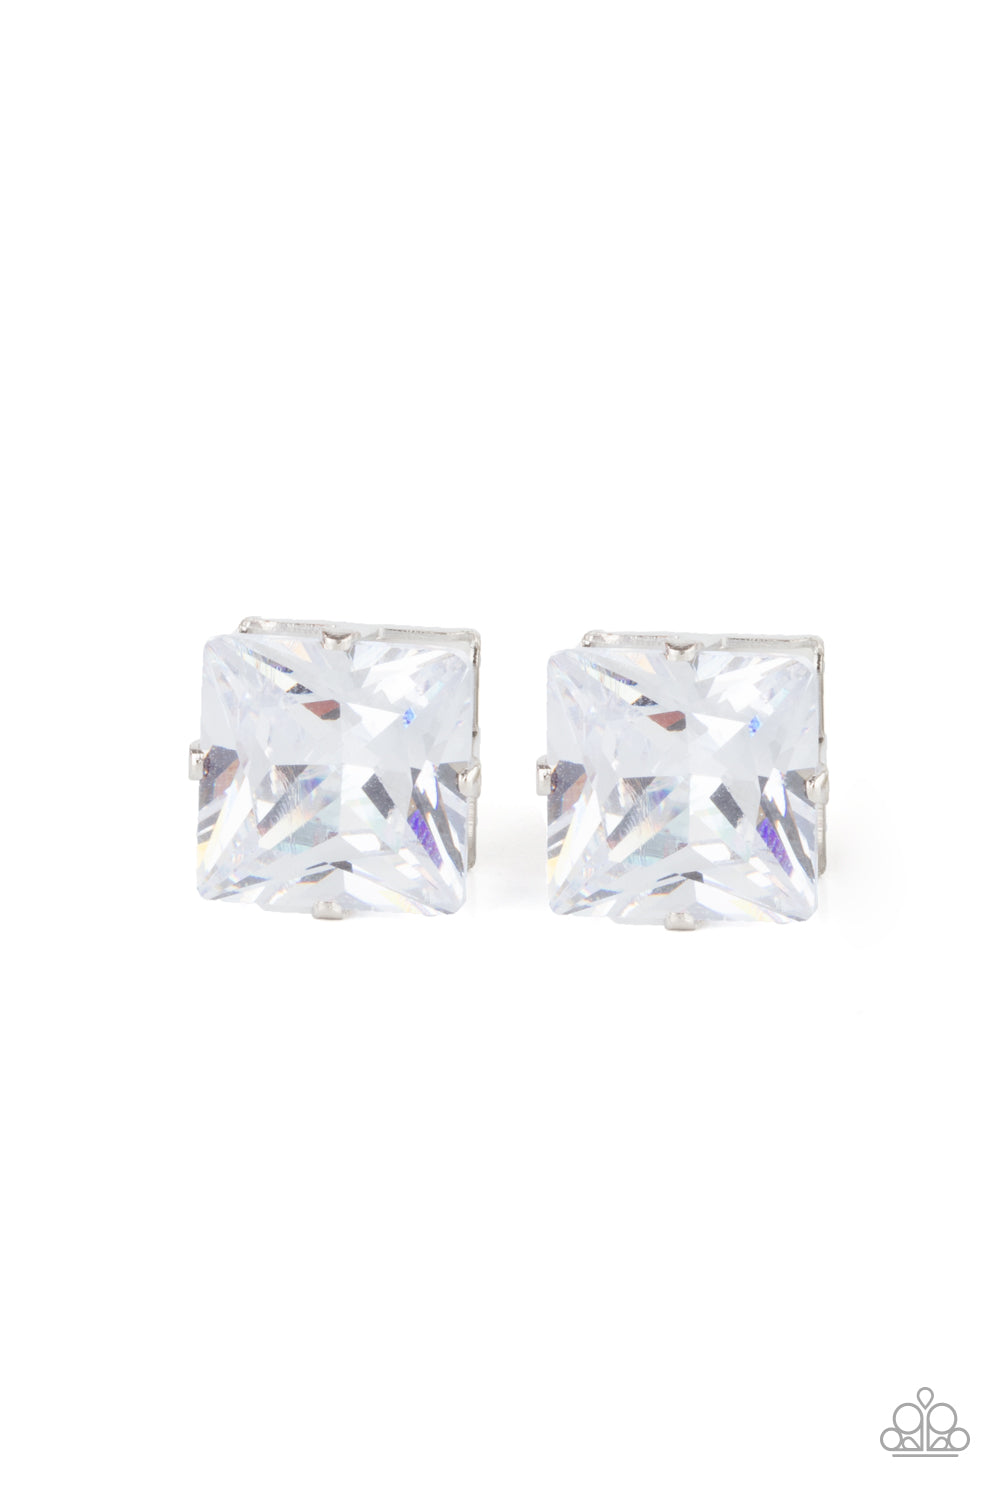 Times Square Timeless - White Paparazzi Earrings